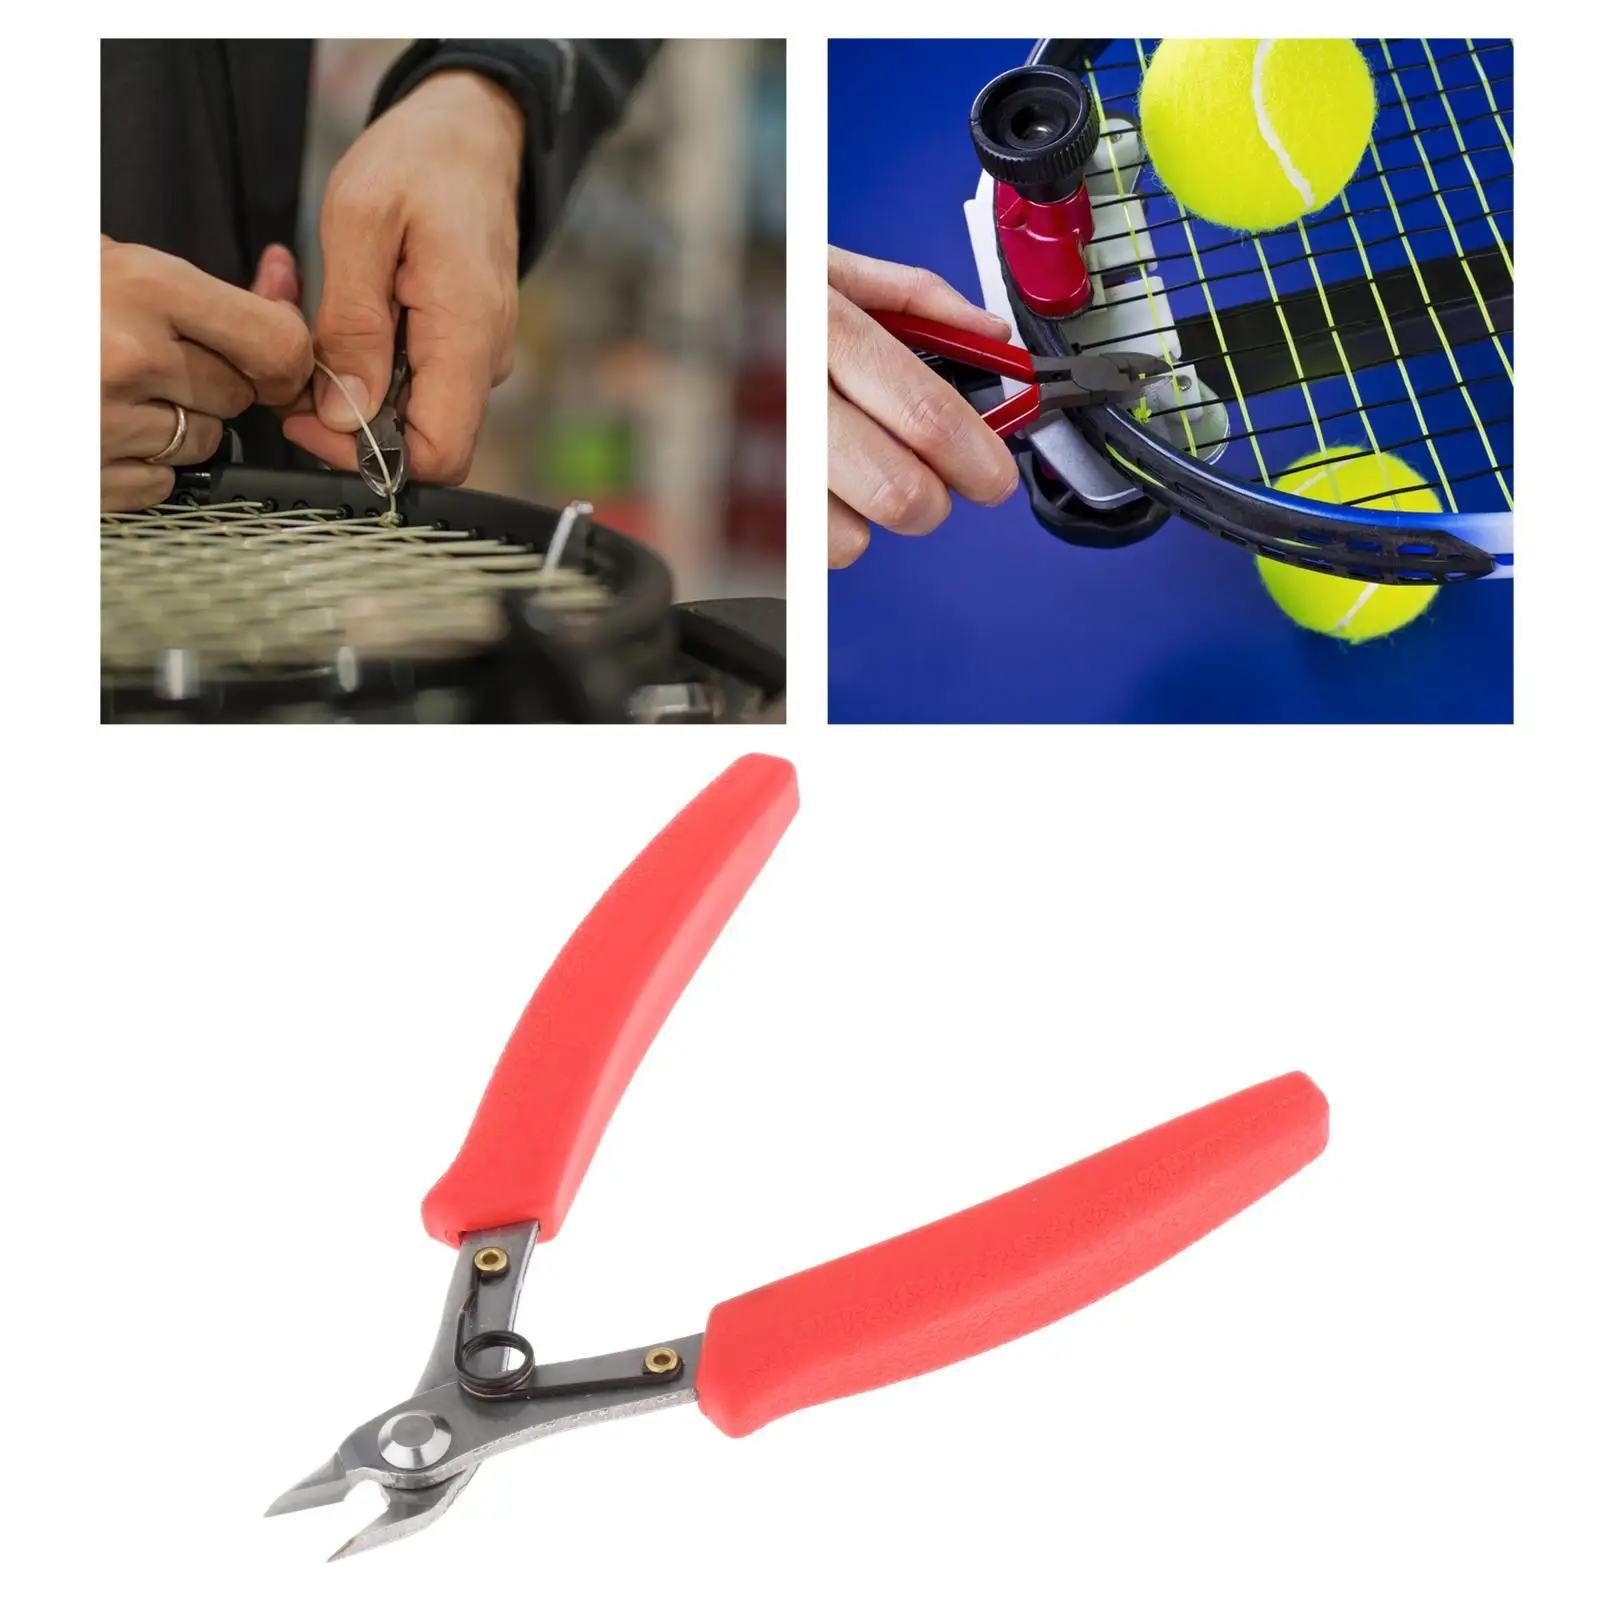 Badminton Tennis Racket Wire Cutter Diagonal Cutting Pliers Professional Stringing Tools Equipment for Trimming Squash Racquet